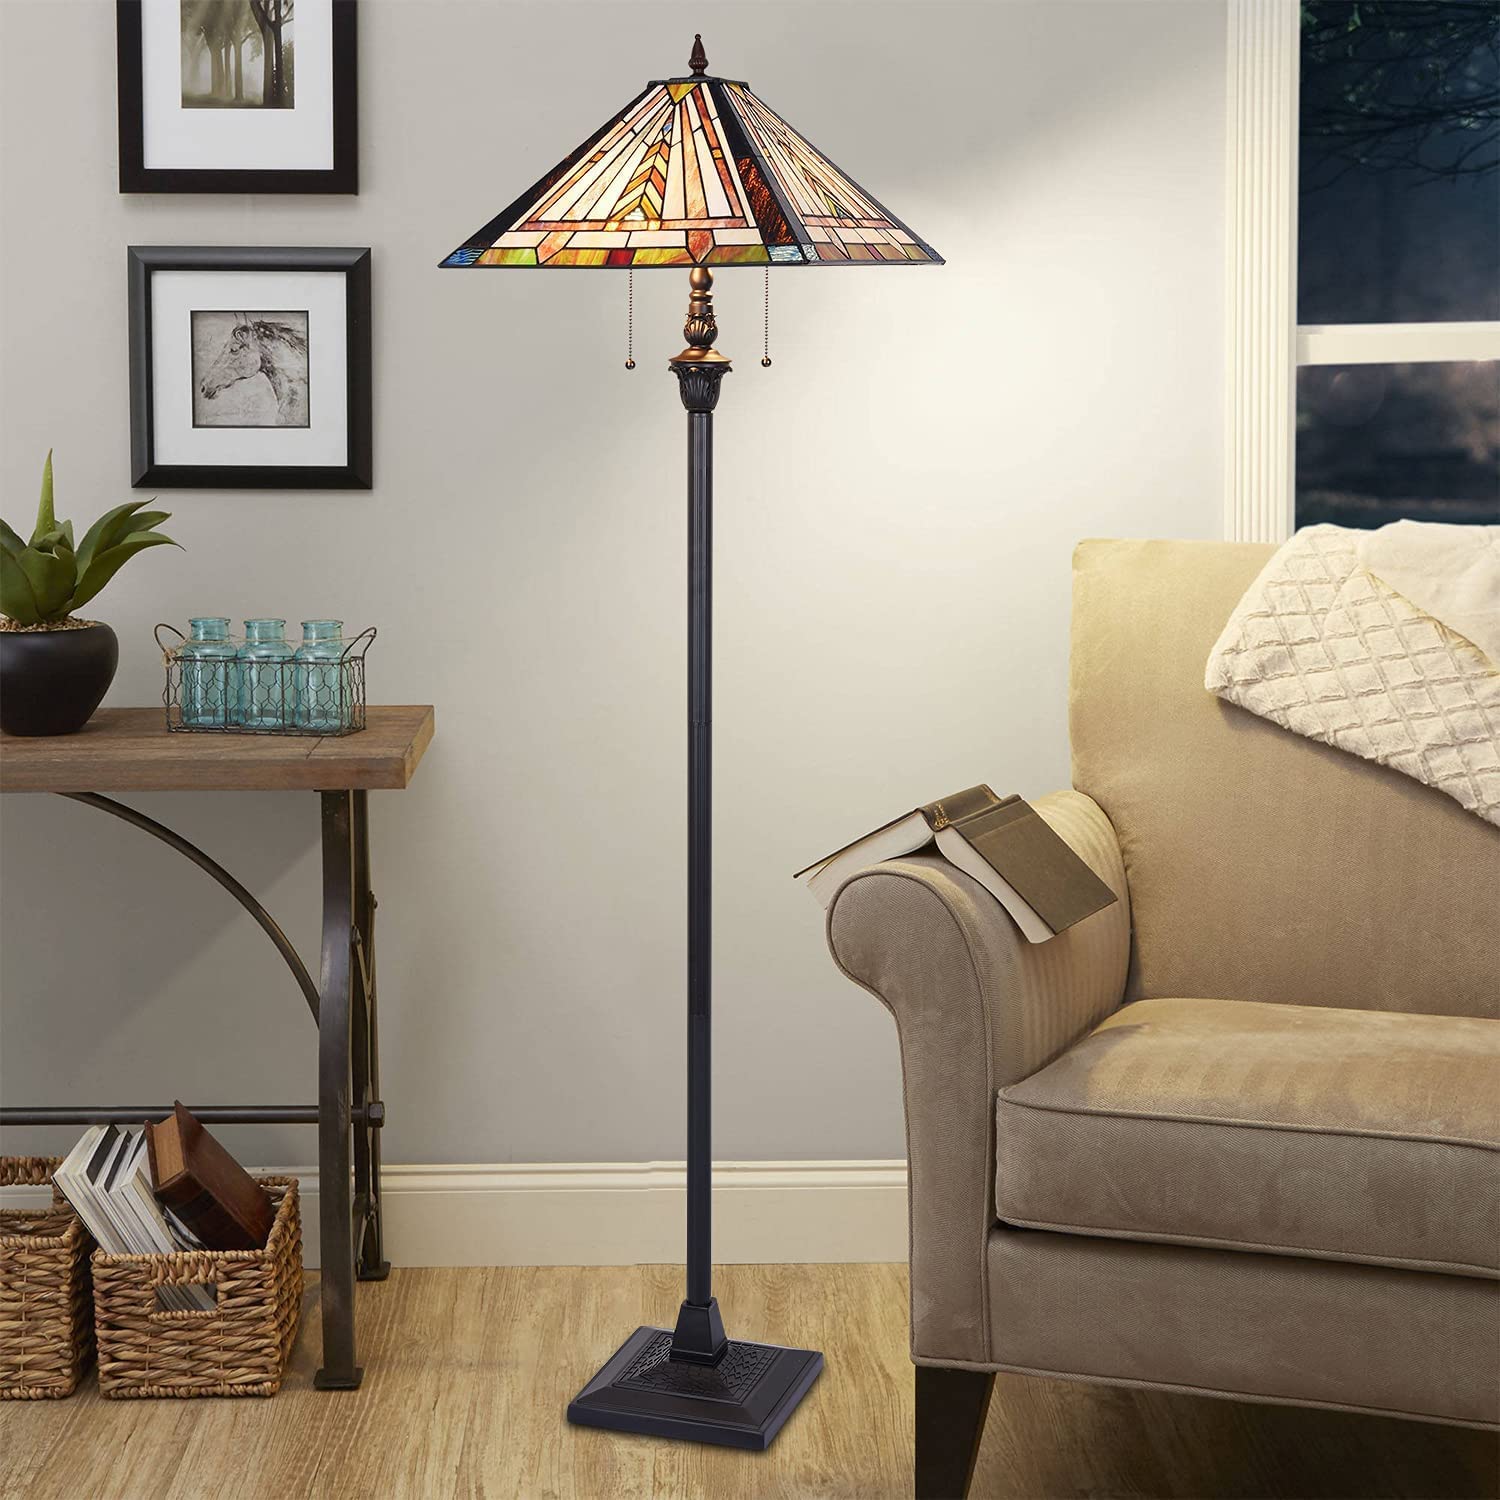  Floor Lamp,Stained Glass Lamp Shade